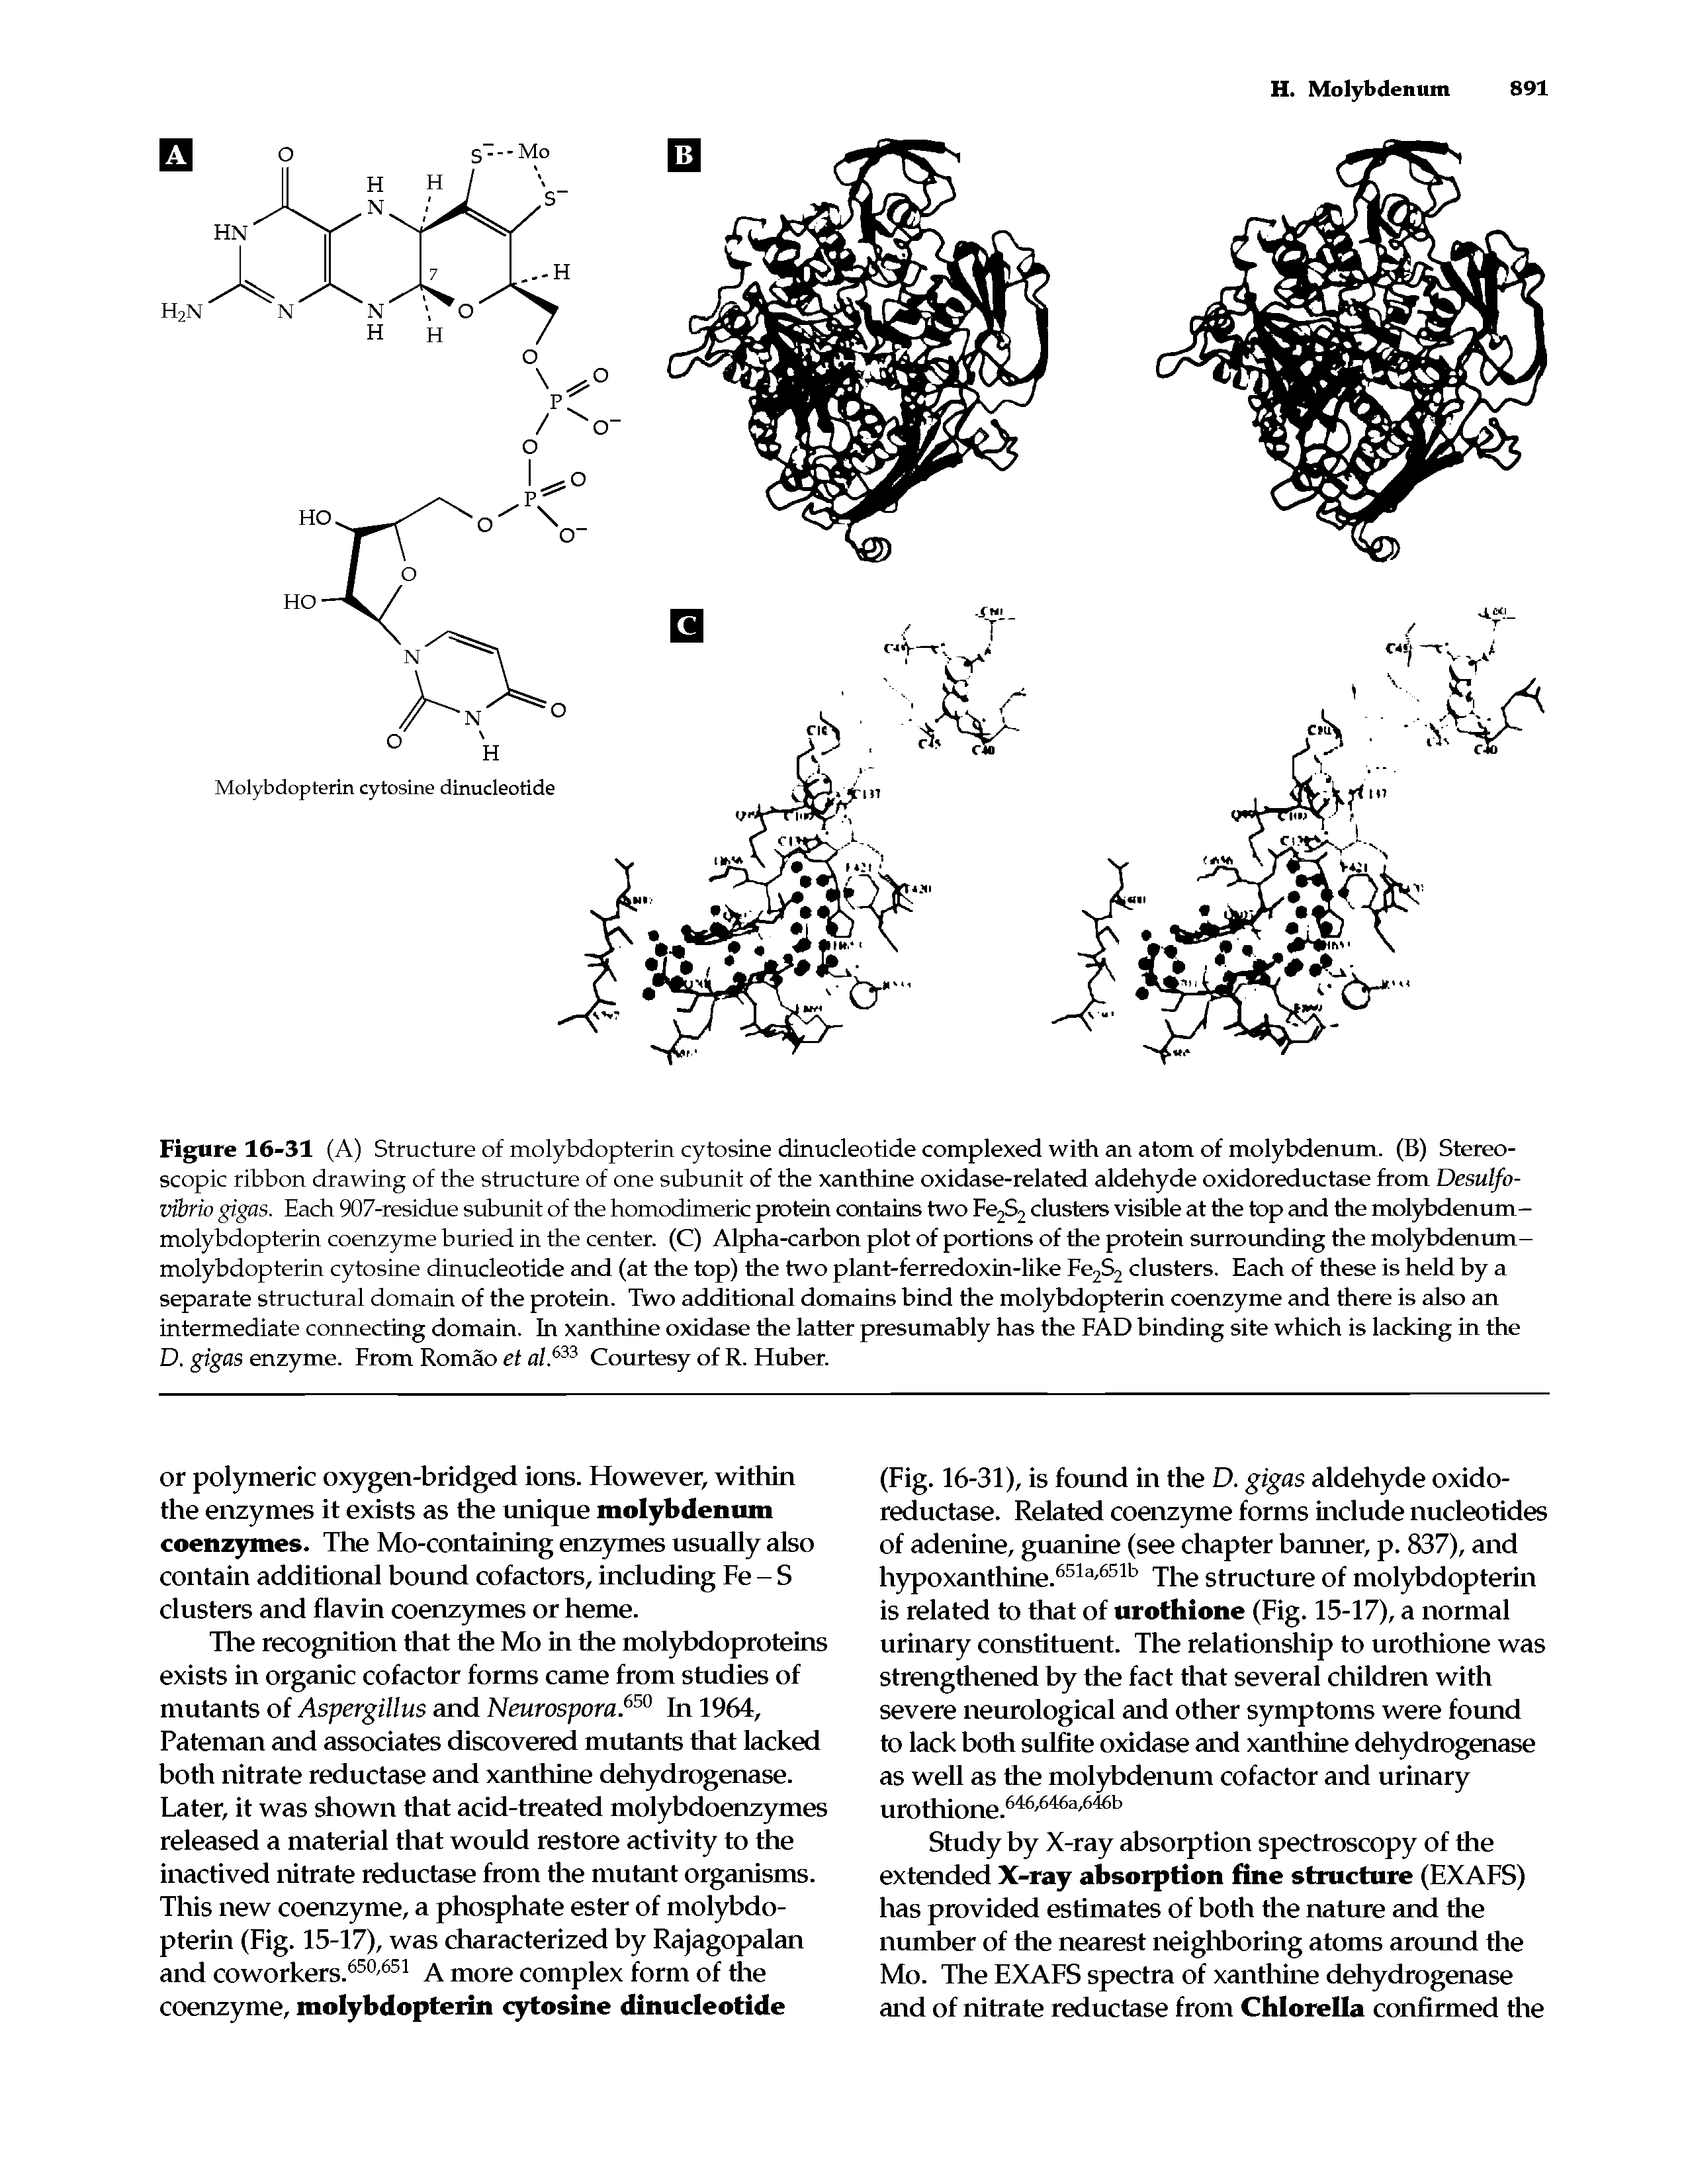 Figure 16-31 (A) Structure of molybdopterin cytosine dinucleotide complexed with an atom of molybdenum. (B) Stereoscopic ribbon drawing of the structure of one subunit of the xanthine oxidase-related aldehyde oxidoreductase from Desulfo-vibrio gigas. Each 907-residue subunit of the homodimeric protein contains two Fe2S2 clusters visible at the top and the molybdenum-molybdopterin coenzyme buried in the center. (C) Alpha-carbon plot of portions of the protein surrounding the molybdenum-molybdopterin cytosine dinucleotide and (at the top) the two plant-ferredoxin-like Fe2S2 clusters. Each of these is held by a separate structural domain of the protein. Two additional domains bind the molybdopterin coenzyme and there is also an intermediate connecting domain. In xanthine oxidase the latter presumably has the FAD binding site which is lacking in the D. gigas enzyme. From Romao et al.633 Courtesy of R. Huber.